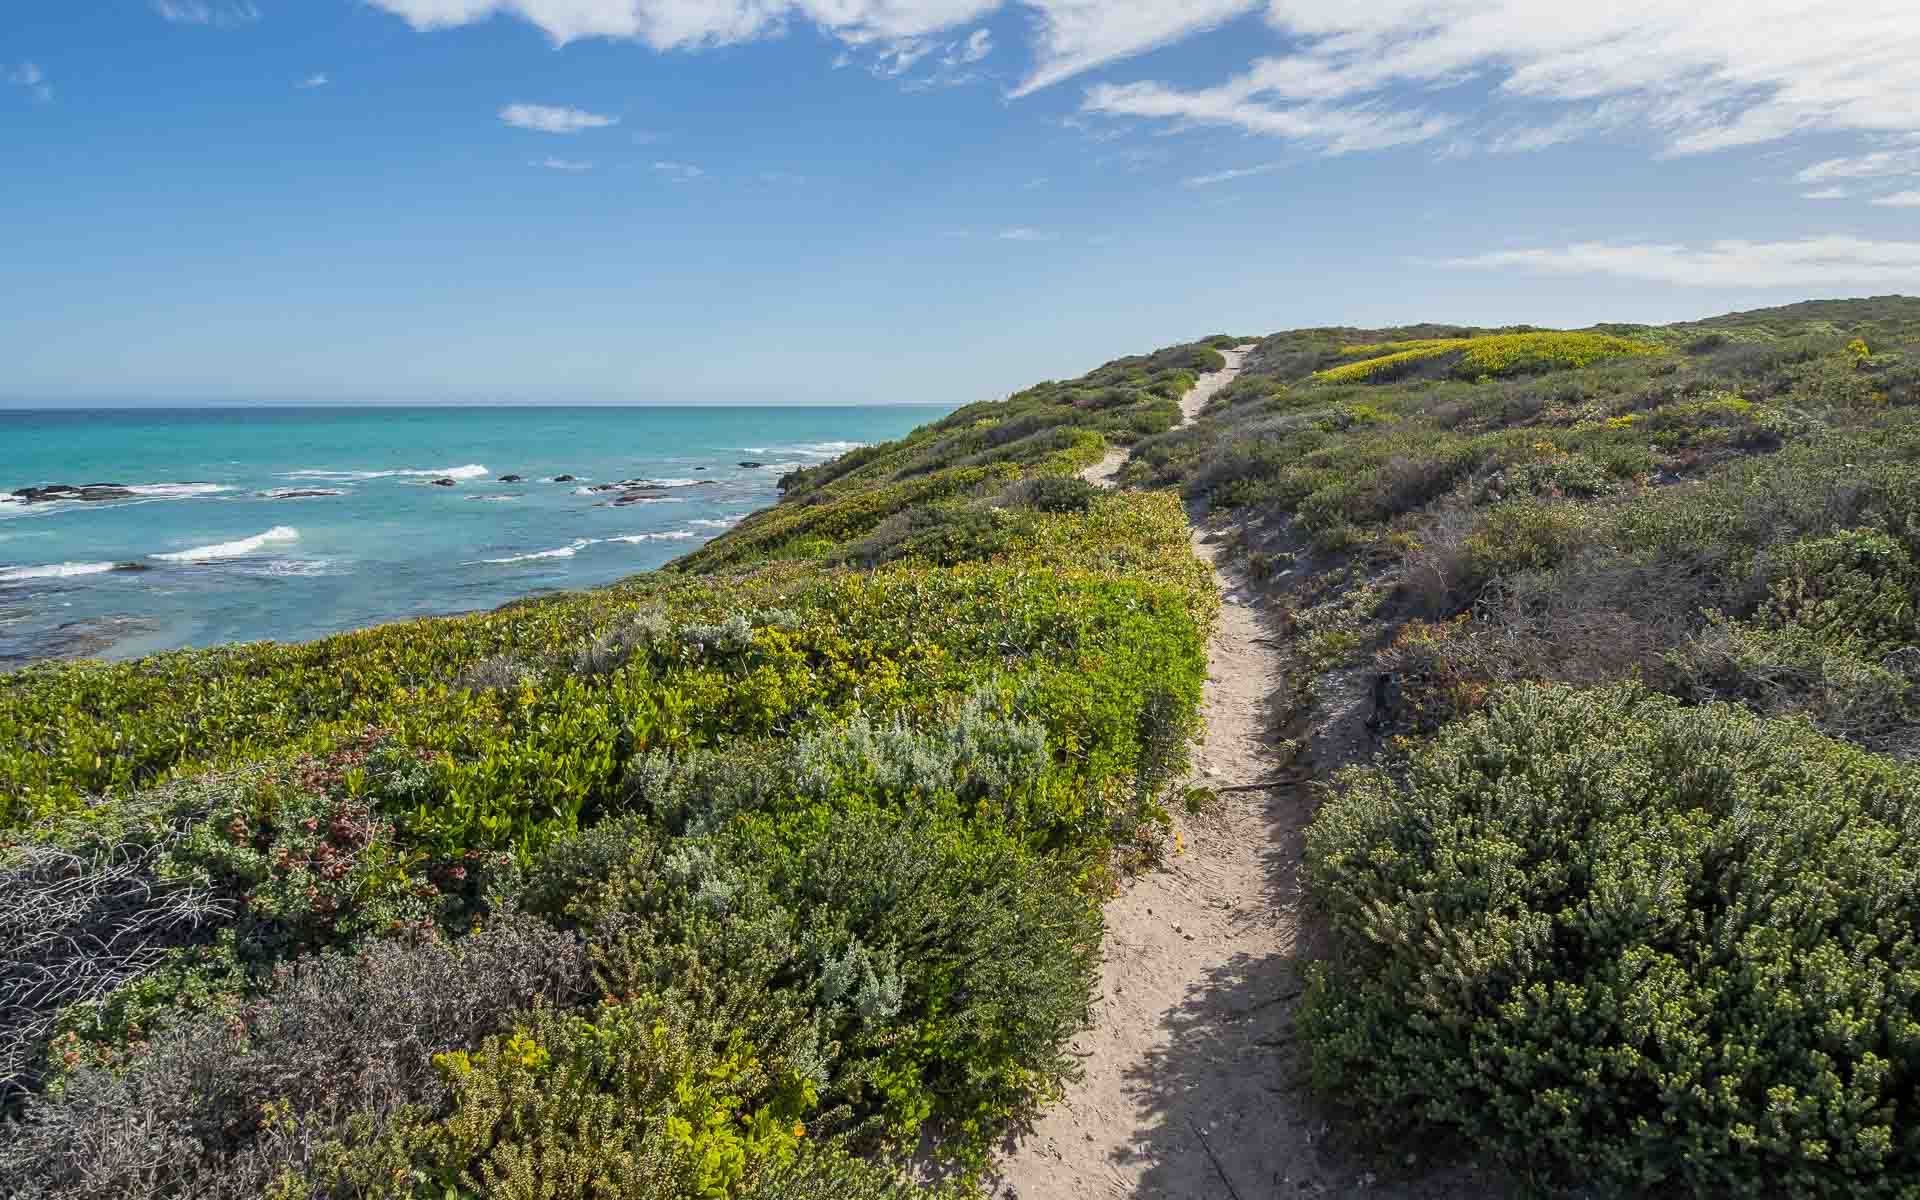 Overberg - De Hoop Nature Reserve - Walking path leading through the sand dunes at the ocean with coastal vegetation